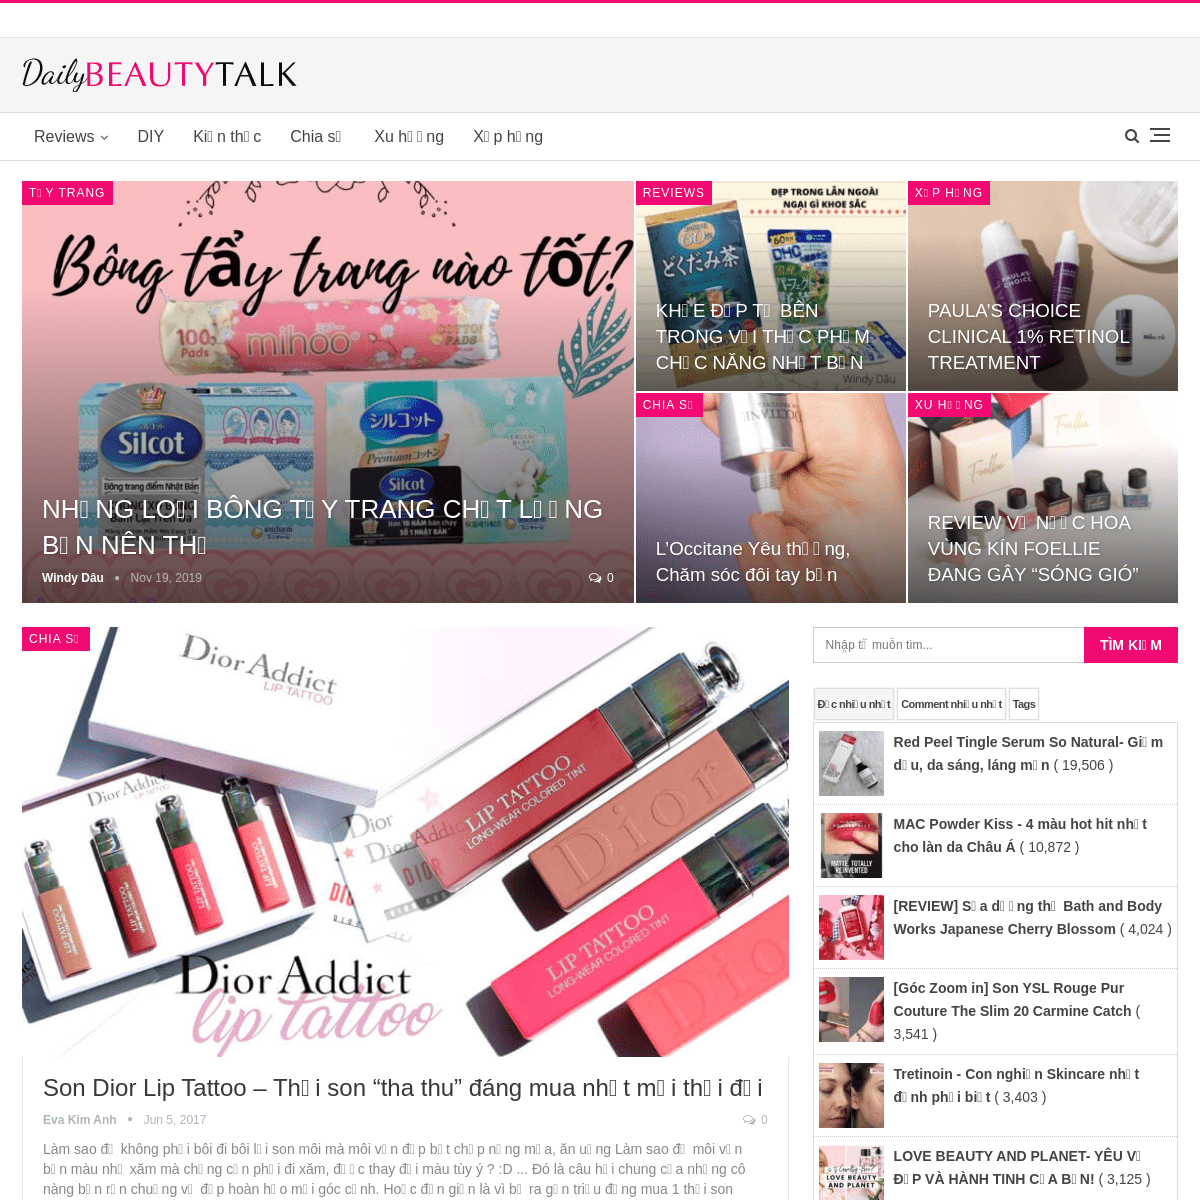 A complete backup of dailybeautytalk.com